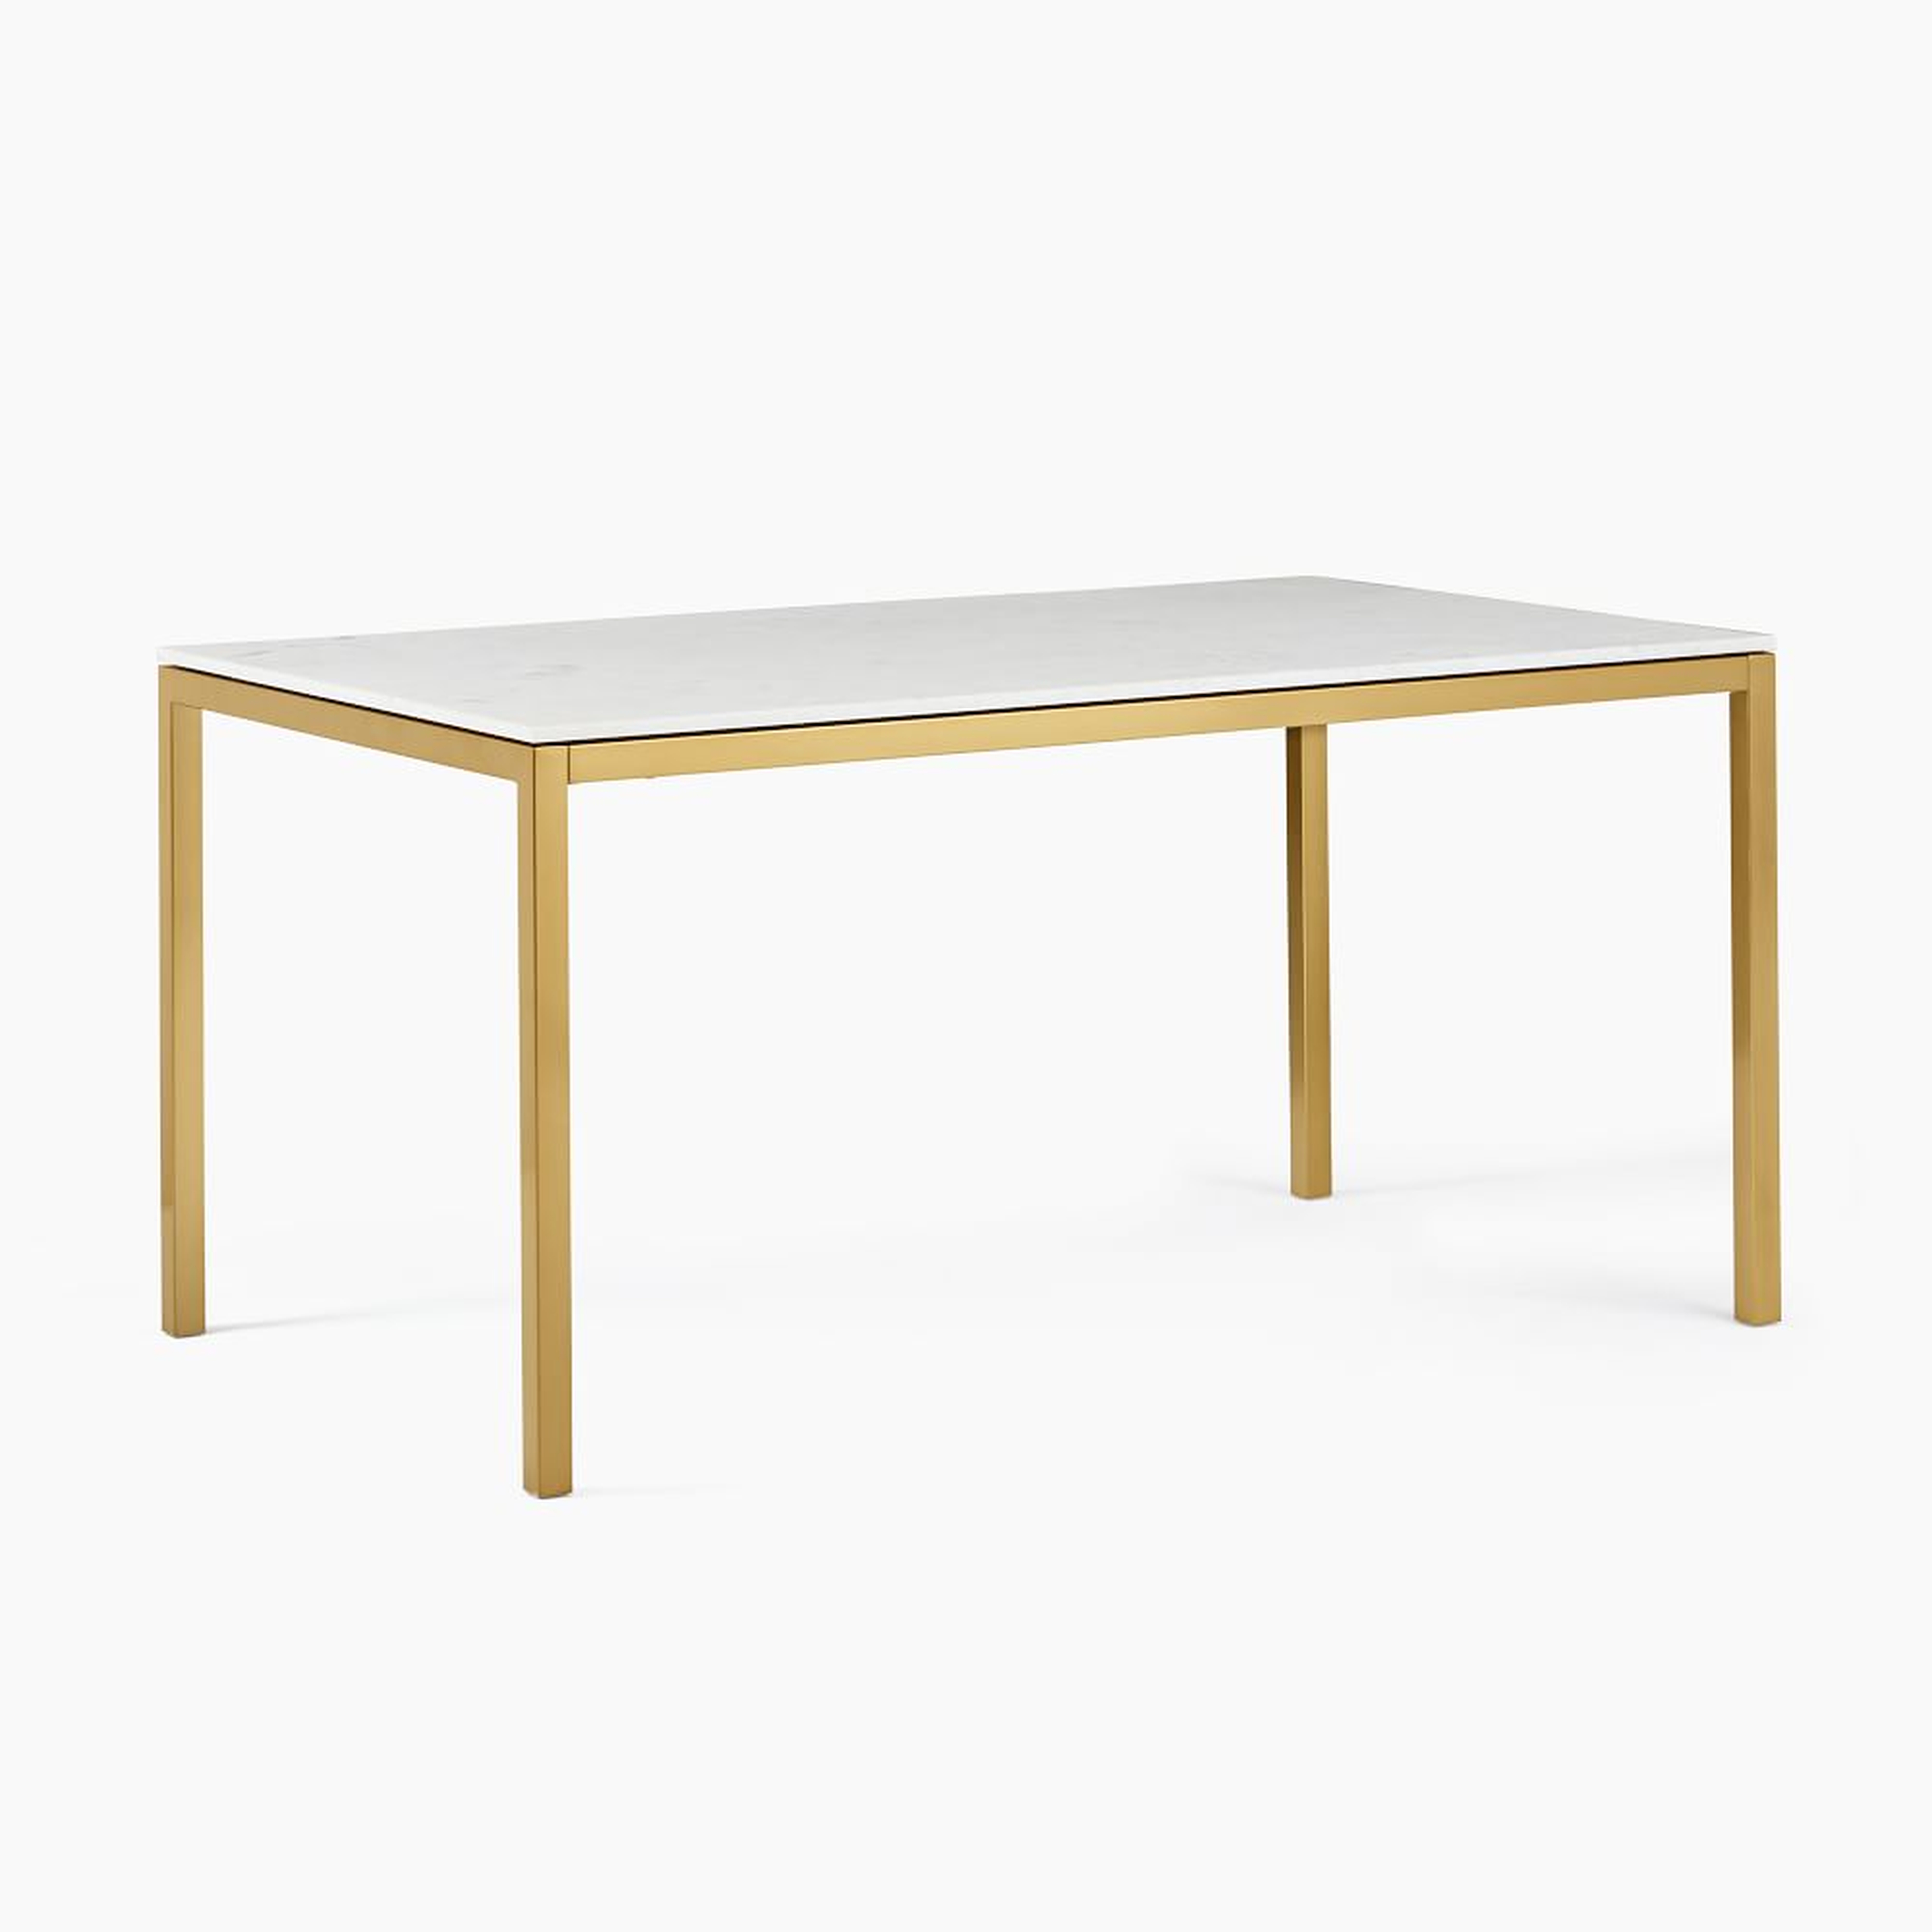 Frame 60" Dining Table, Marble, Antique Brass - West Elm